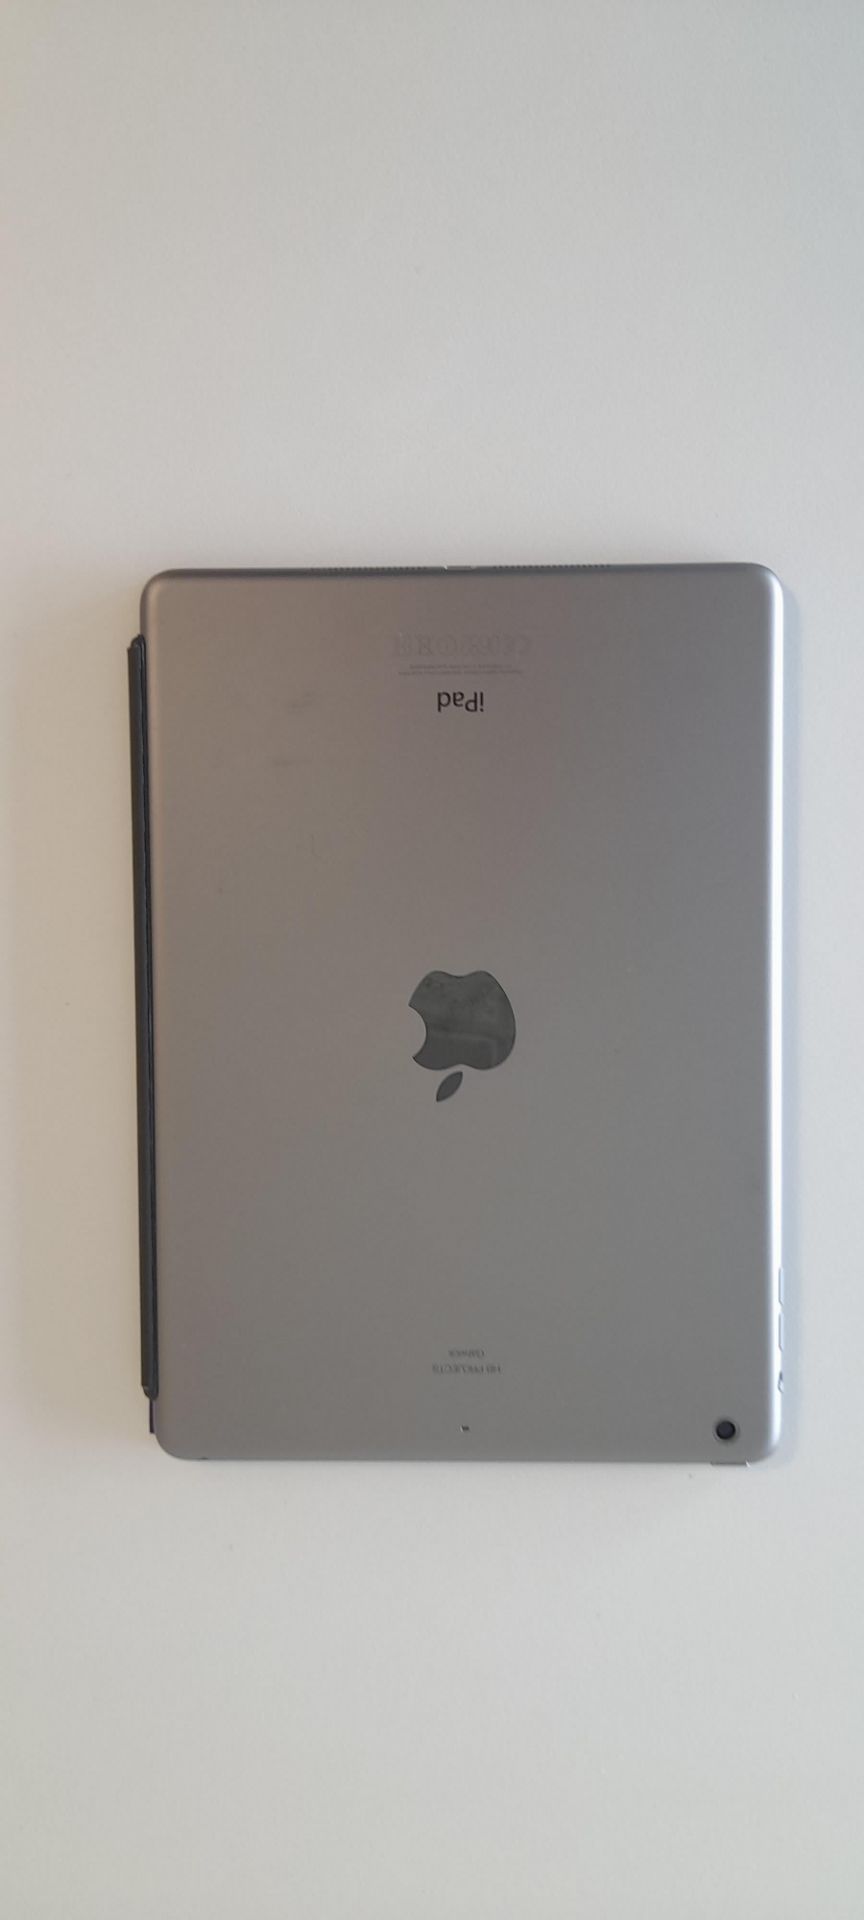 Apple iPad Air Wi-Fi, Model A1474, Space Grey. S/N DMPQL561FK129. Collection from Canary Wharf, - Image 3 of 6